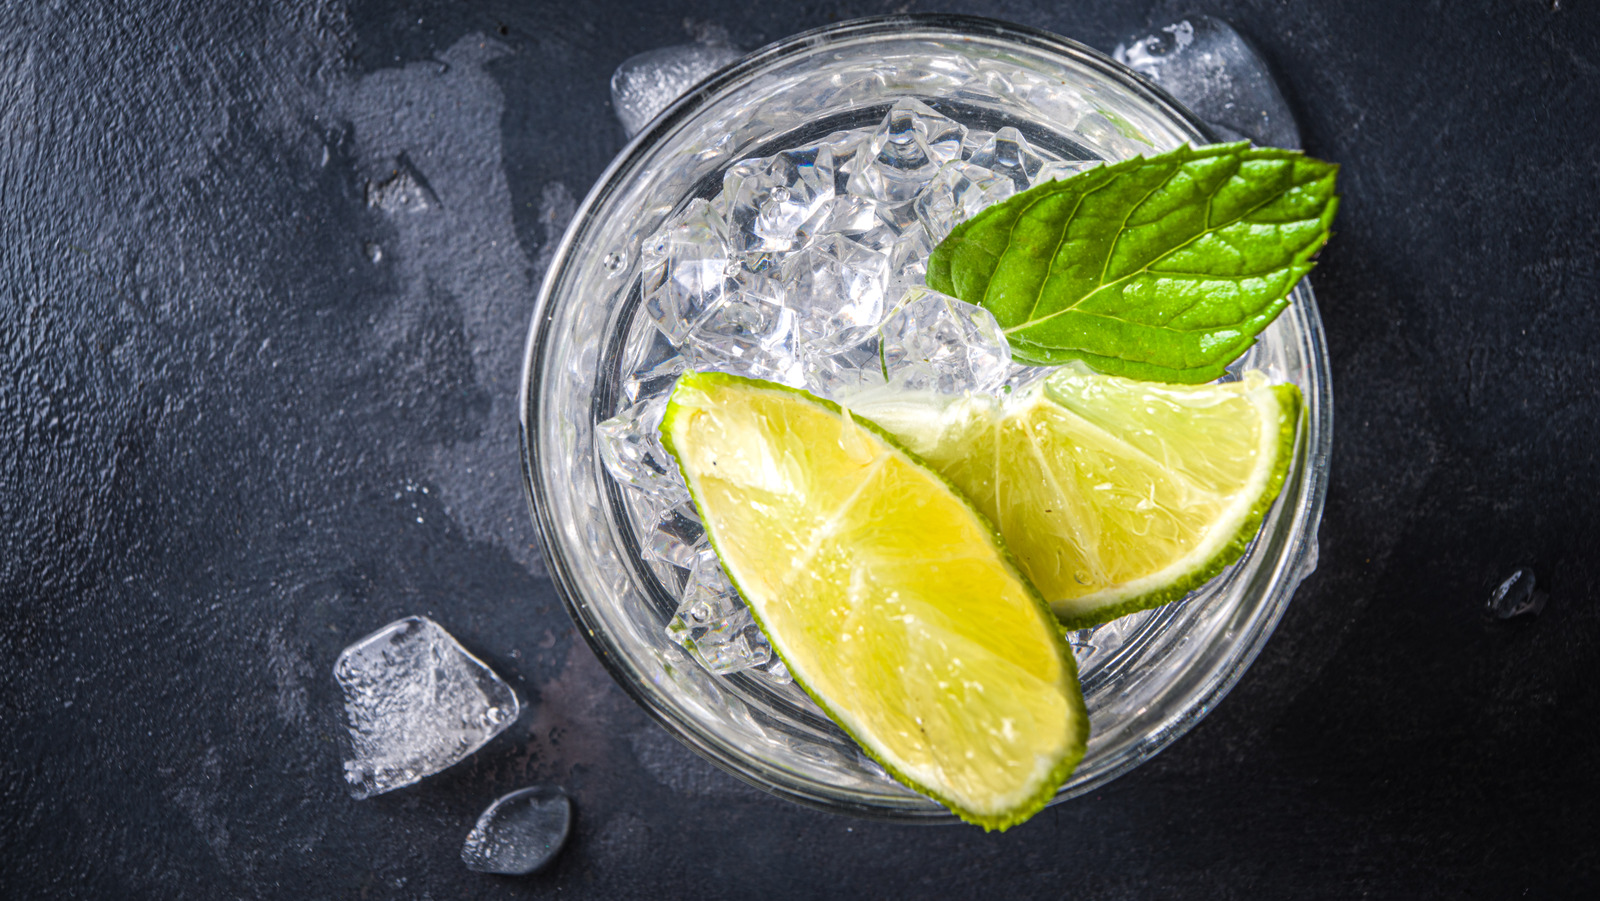 What Your Favorite Vodka Brand Says About You - Thrillist